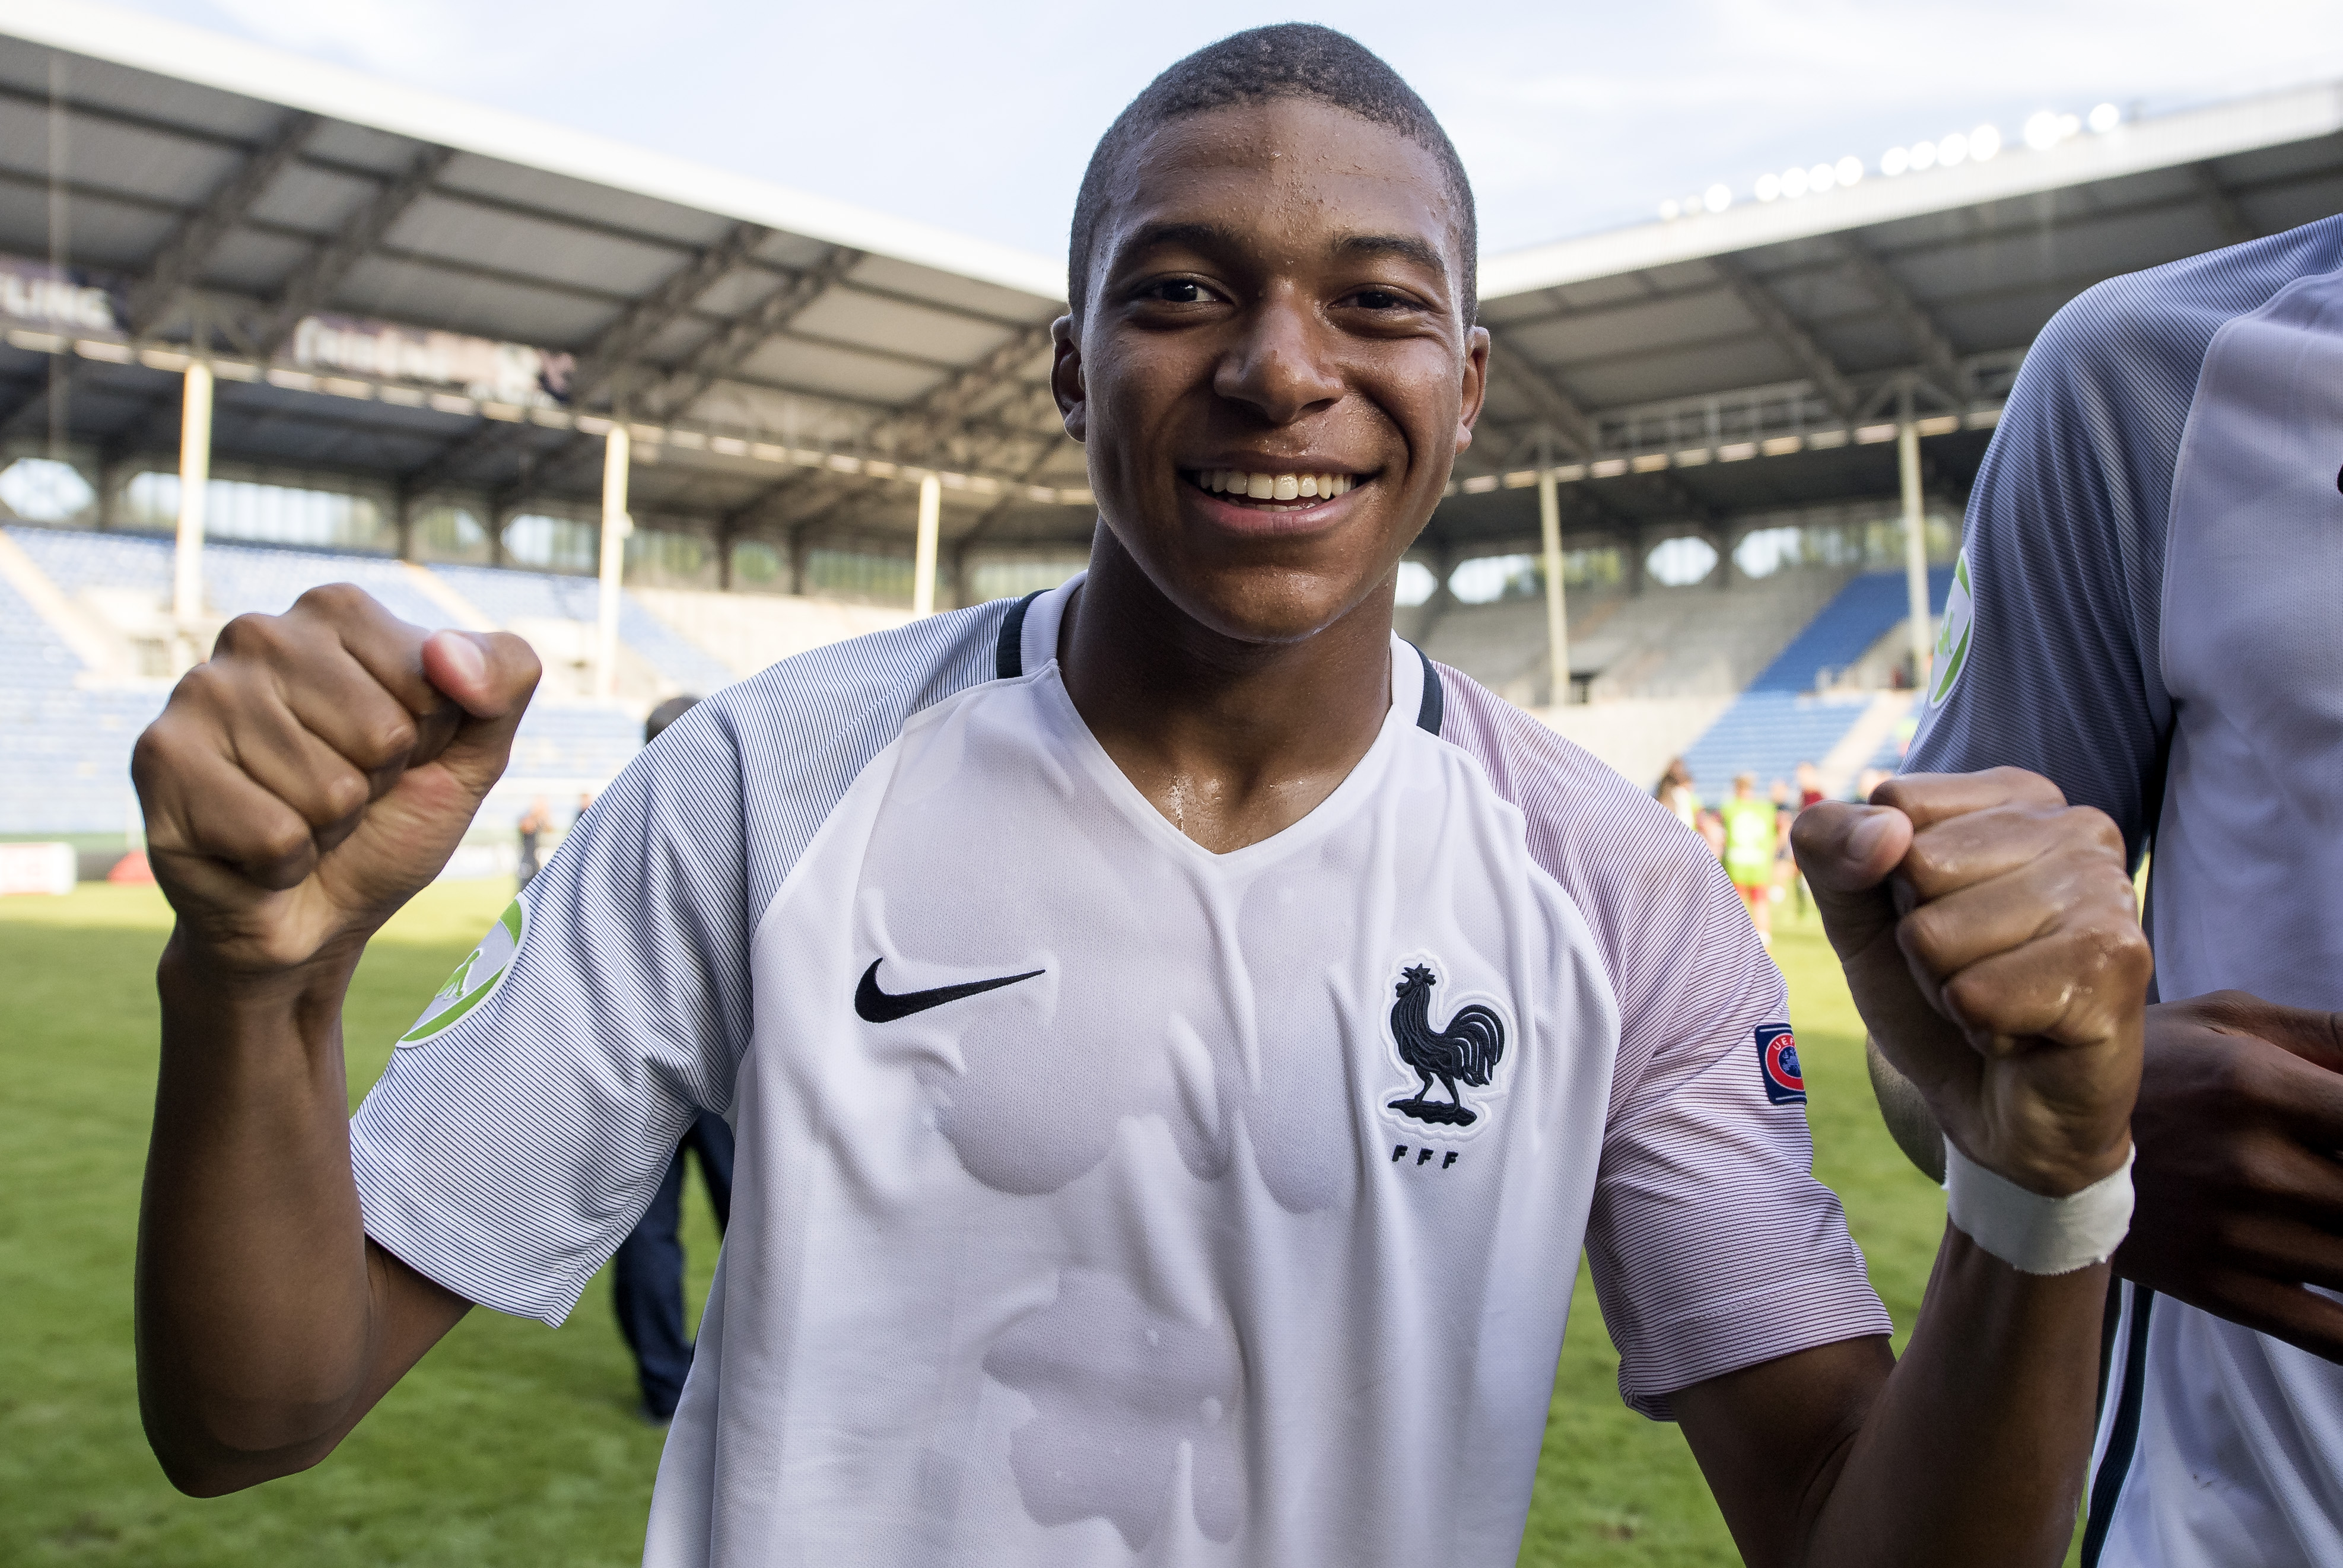 Wenger: “We are following Mbappe but there are richer clubs than us”